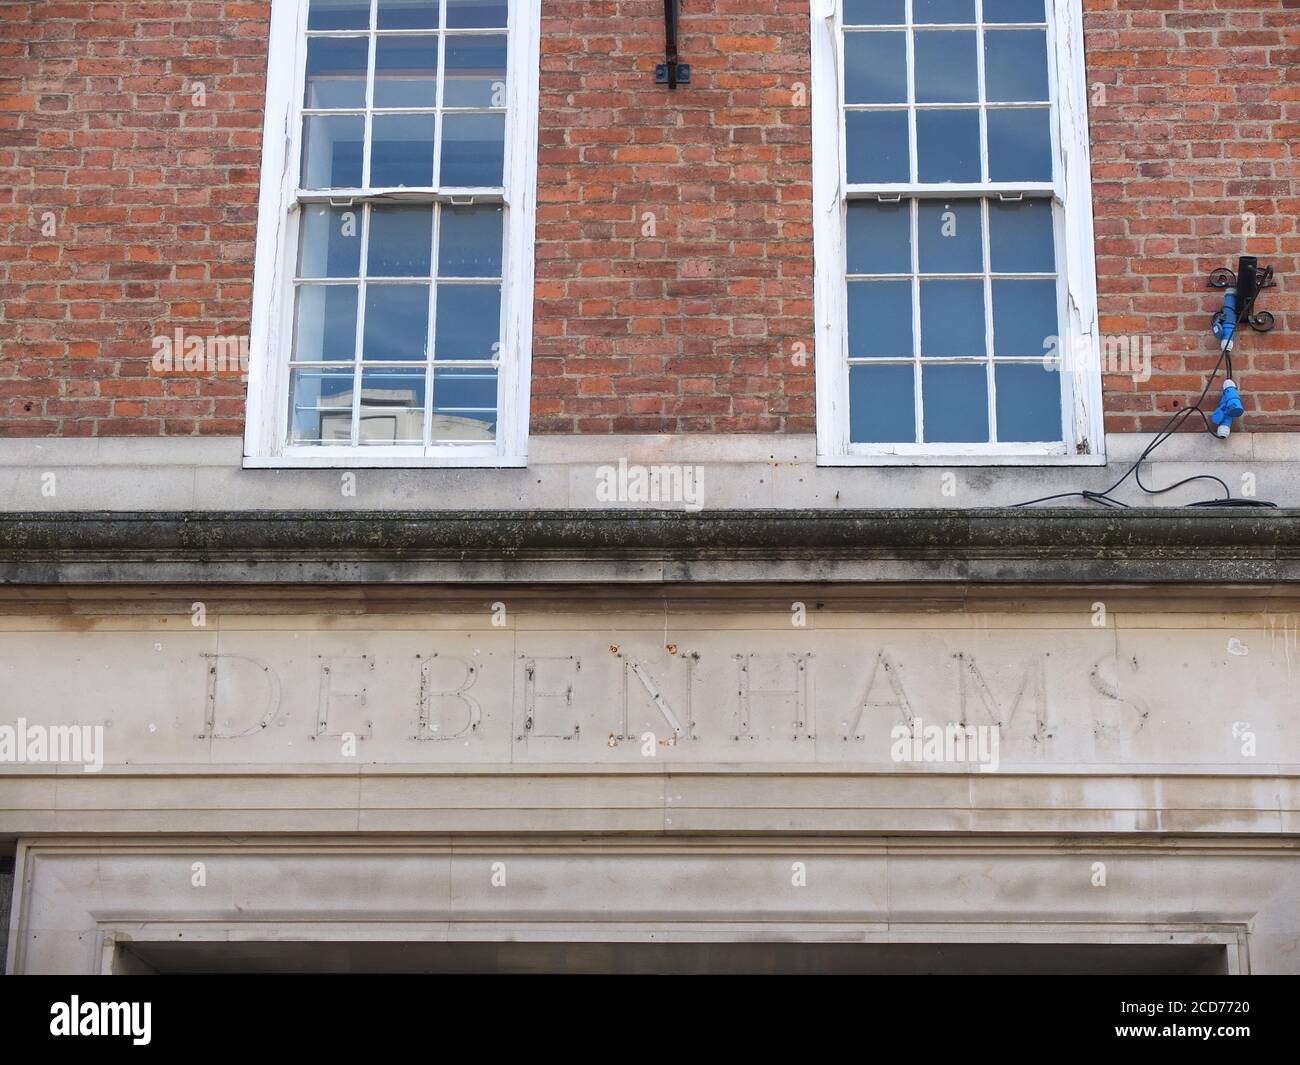 The ghostly imprint of sign letters for struggling UK chain department store Debenhams above a former shop on Davygate in York which has closed down Stock Photo